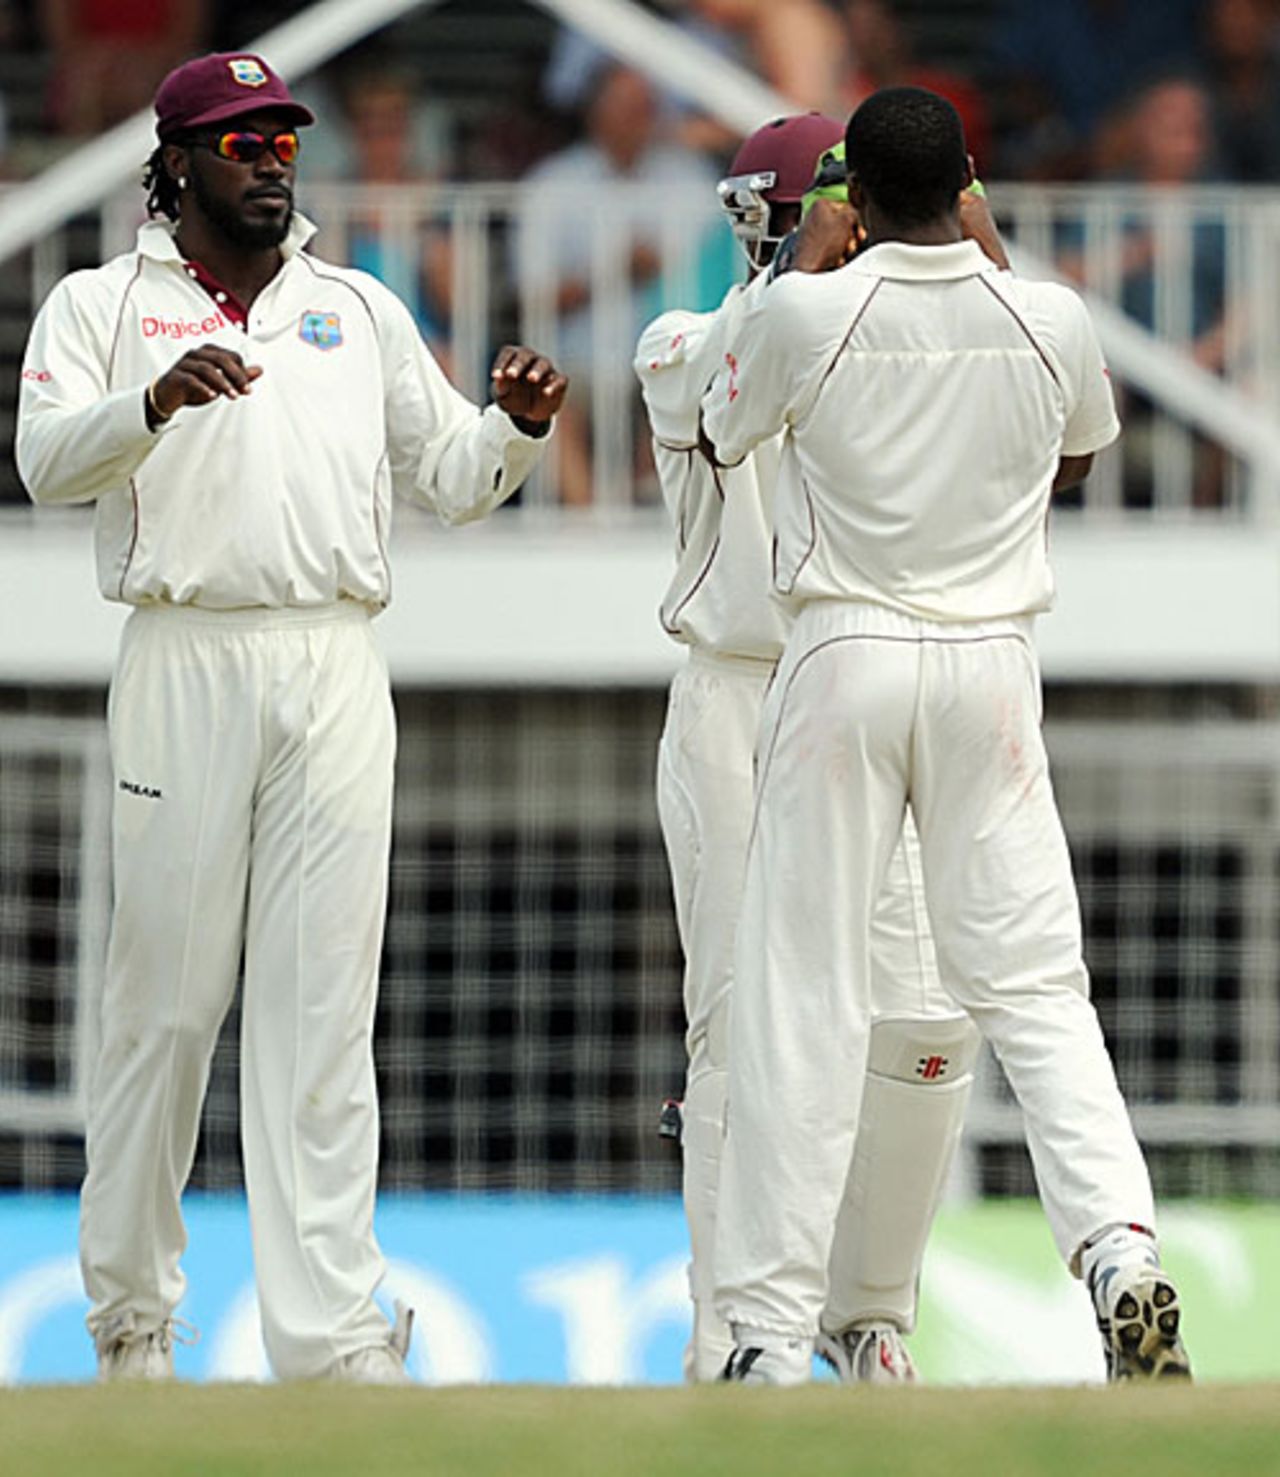 West Indies celebrate the dismissal of Owais Shah, West Indies v England, 3rd Test, Antigua, 4th day, February 18, 2009